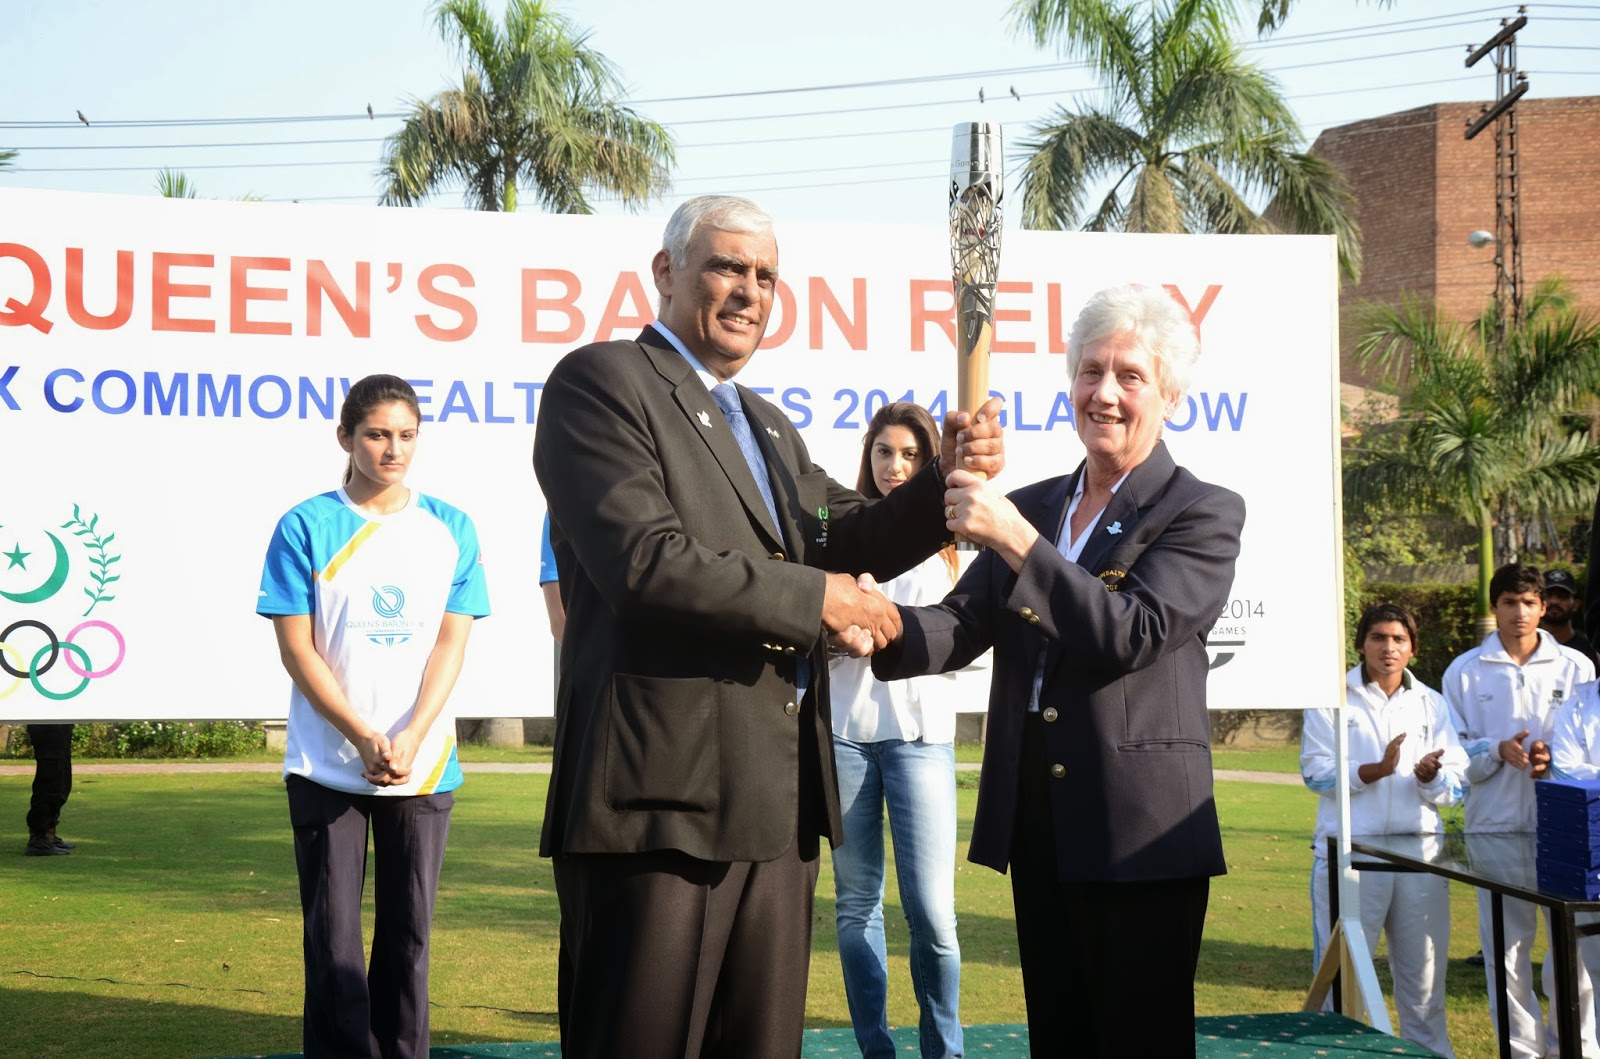 Pakistan Olympic Association President Syed Arif Hasan greeted the Glasgow 2014 Queen's Baton Relay when it arrived in Lahore last October ©Glasgow 2014